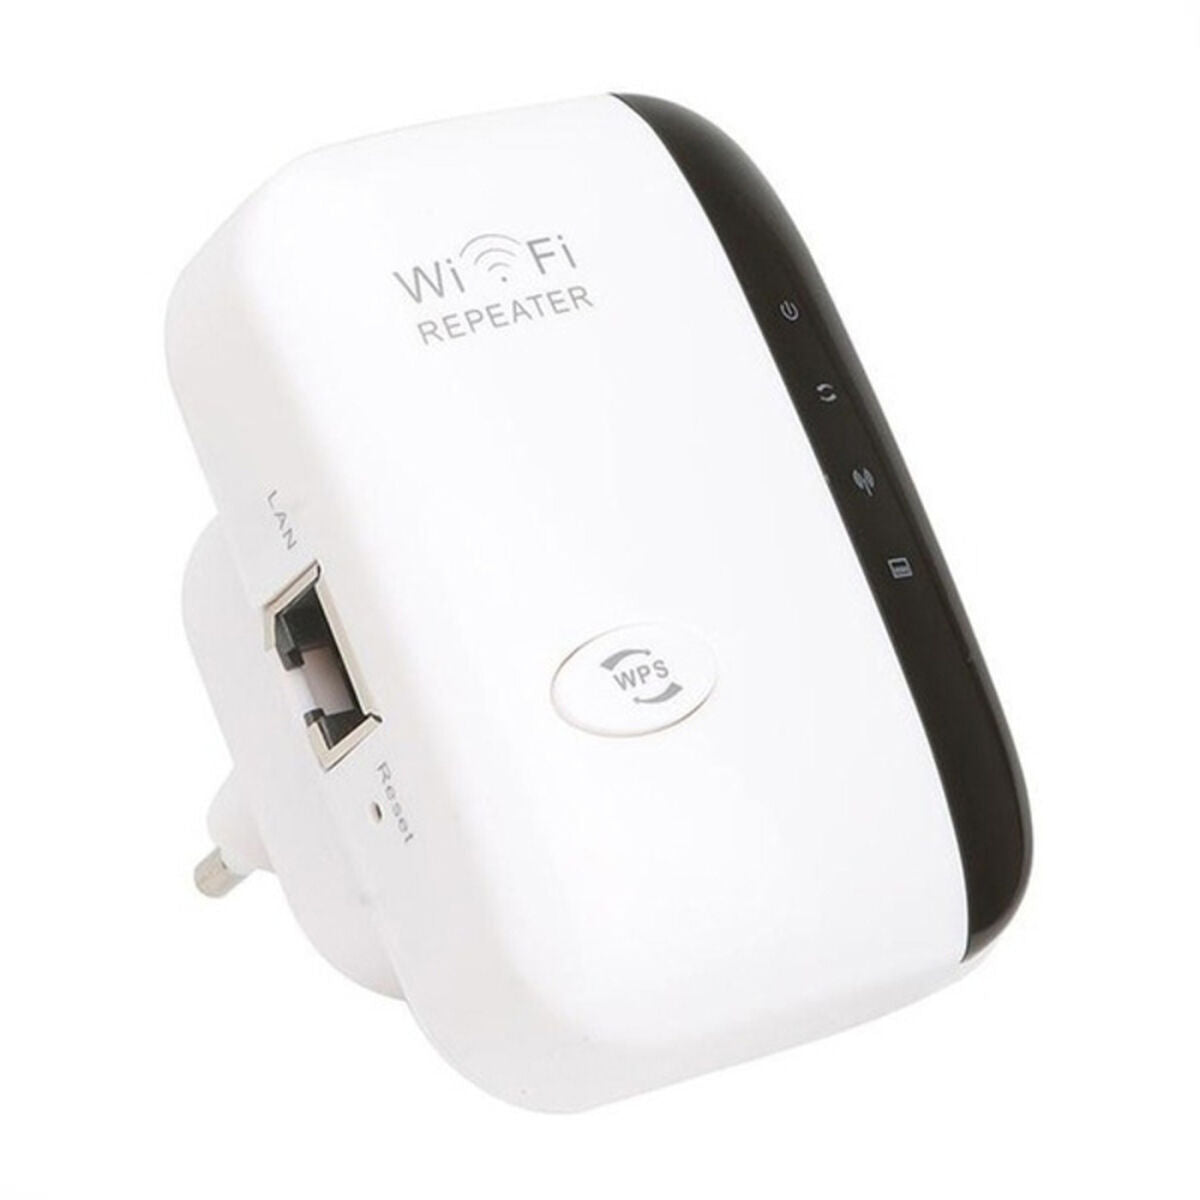 Access point iggual RW-N300-AP/R WIFI 5 Ghz 300 Mbps, iggual, Computing, Network devices, access-point-iggual-rw-n300-ap-r-wifi-5-ghz-300-mbps, Brand_iggual, category-reference-2609, category-reference-2803, category-reference-2820, category-reference-t-19685, category-reference-t-19914, Condition_NEW, networks/wiring, Price_20 - 50, Teleworking, RiotNook